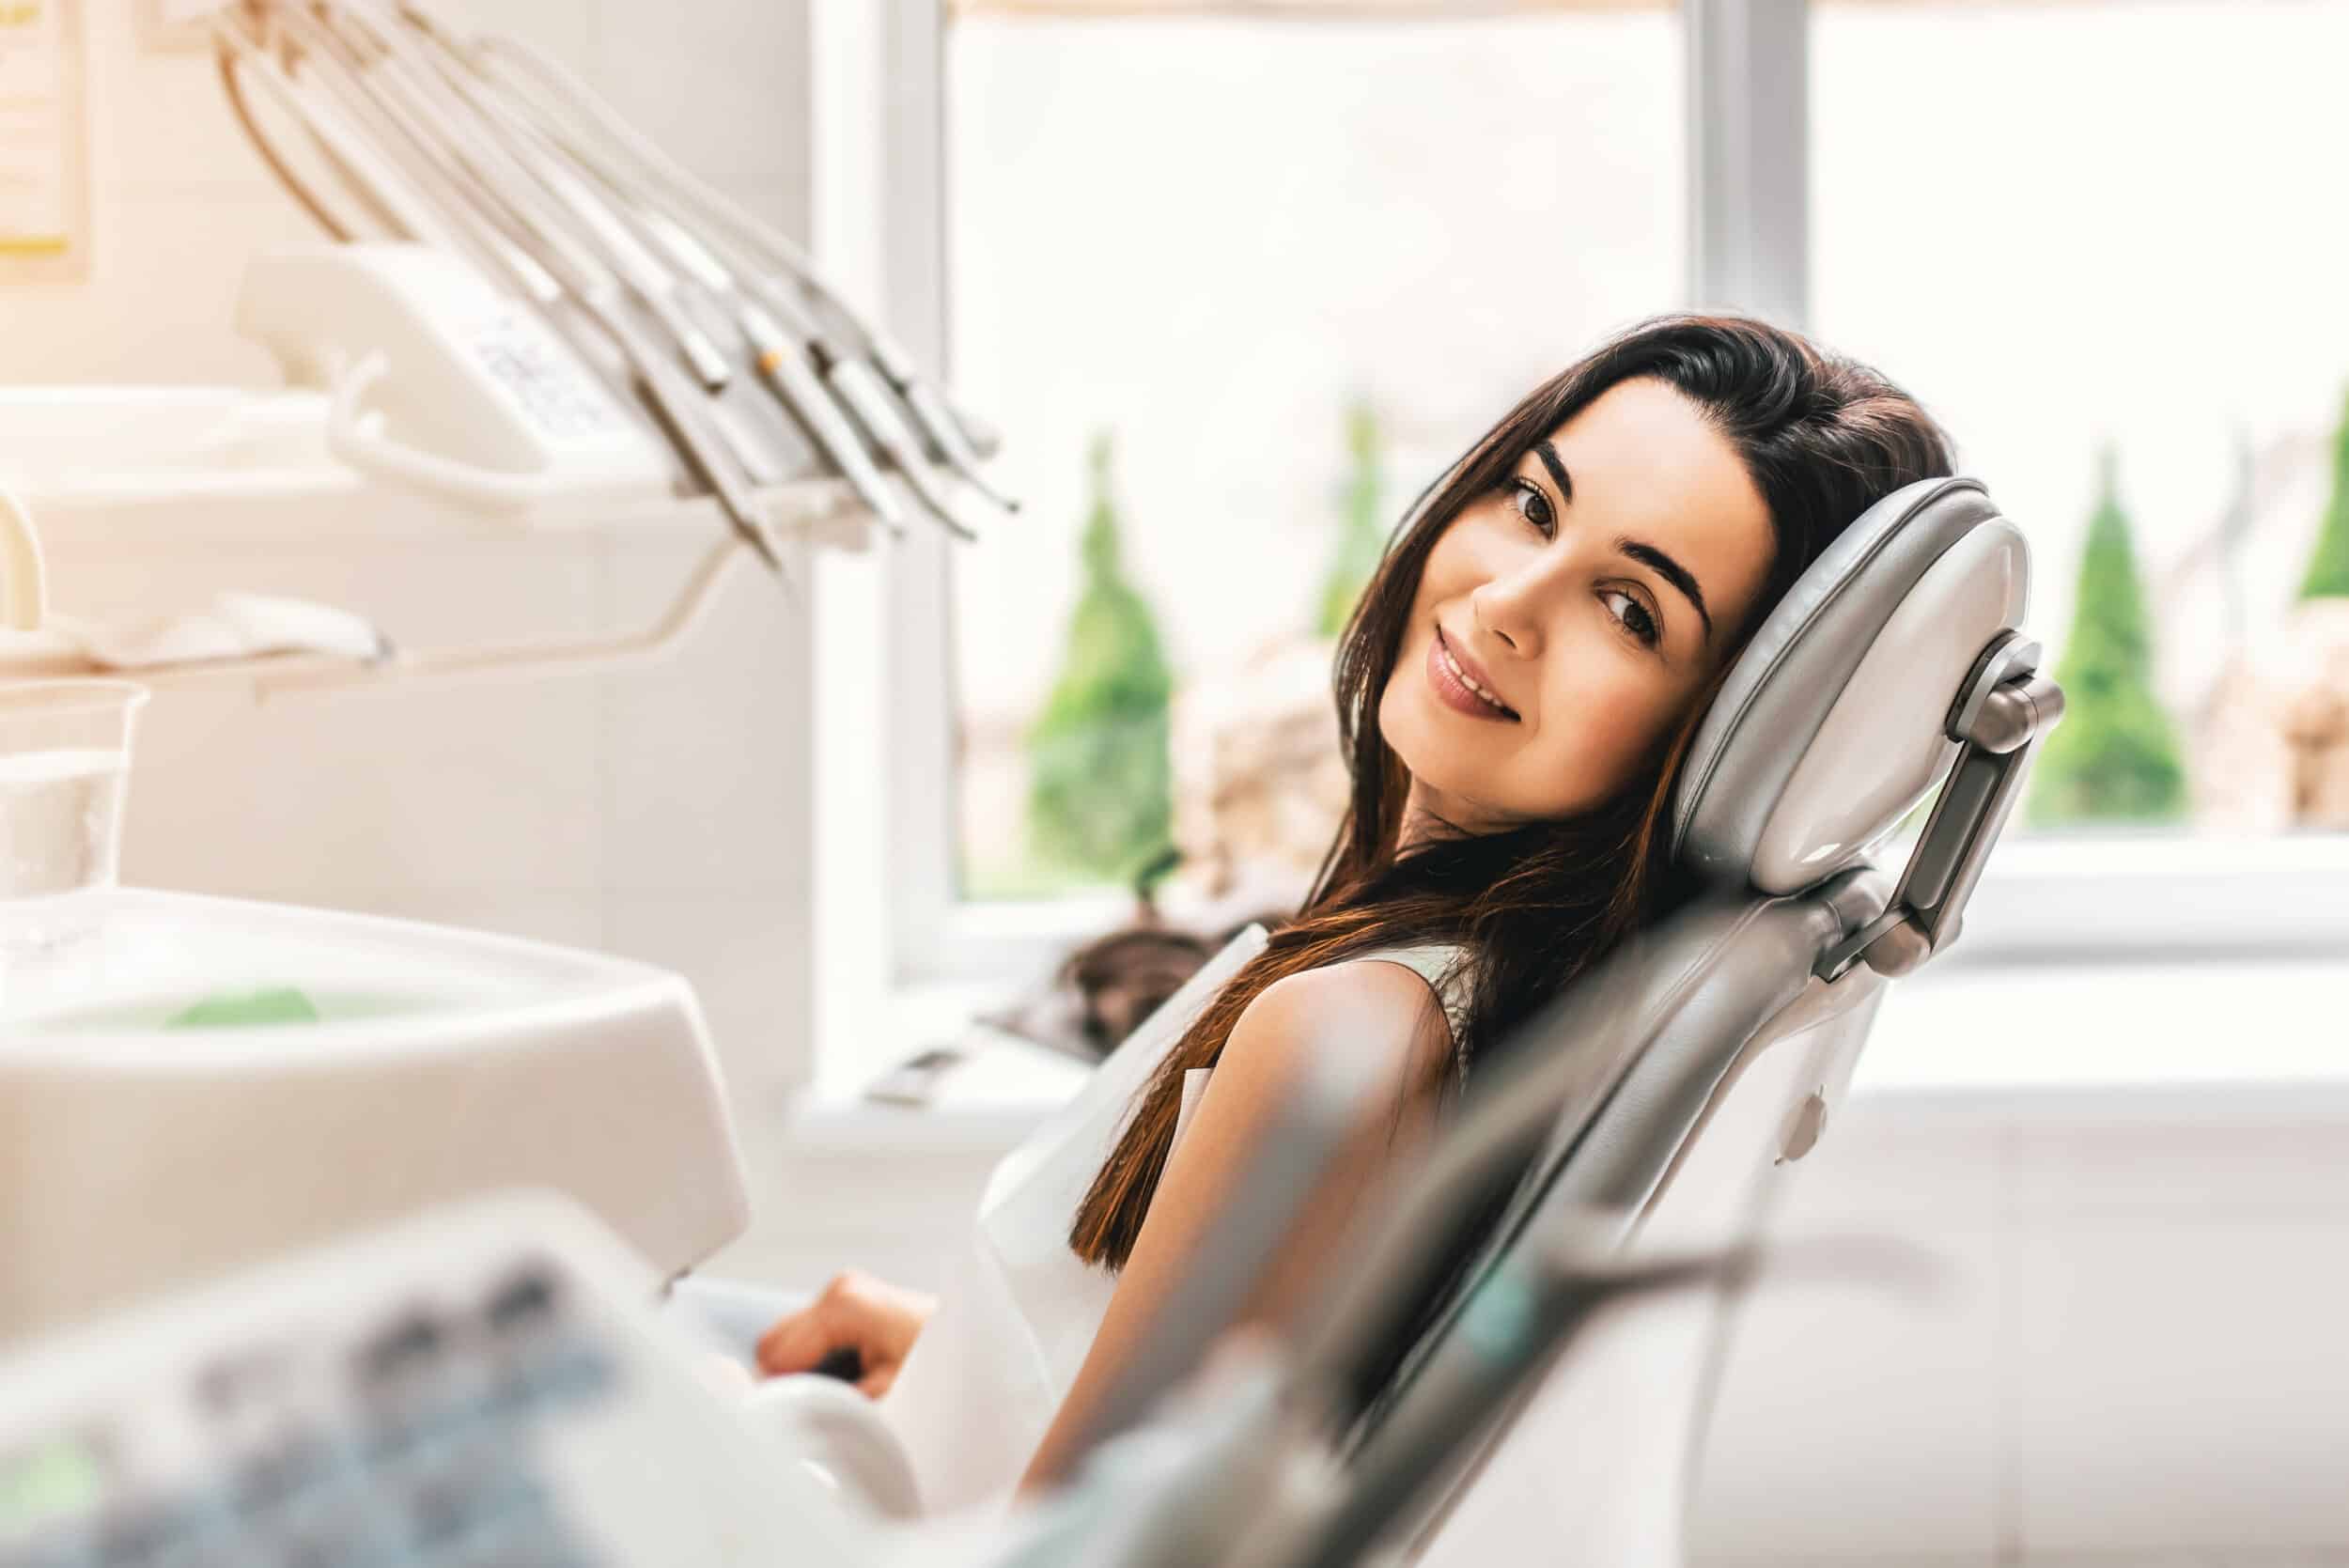 A woman sitting in a dentist’s chair and smiling